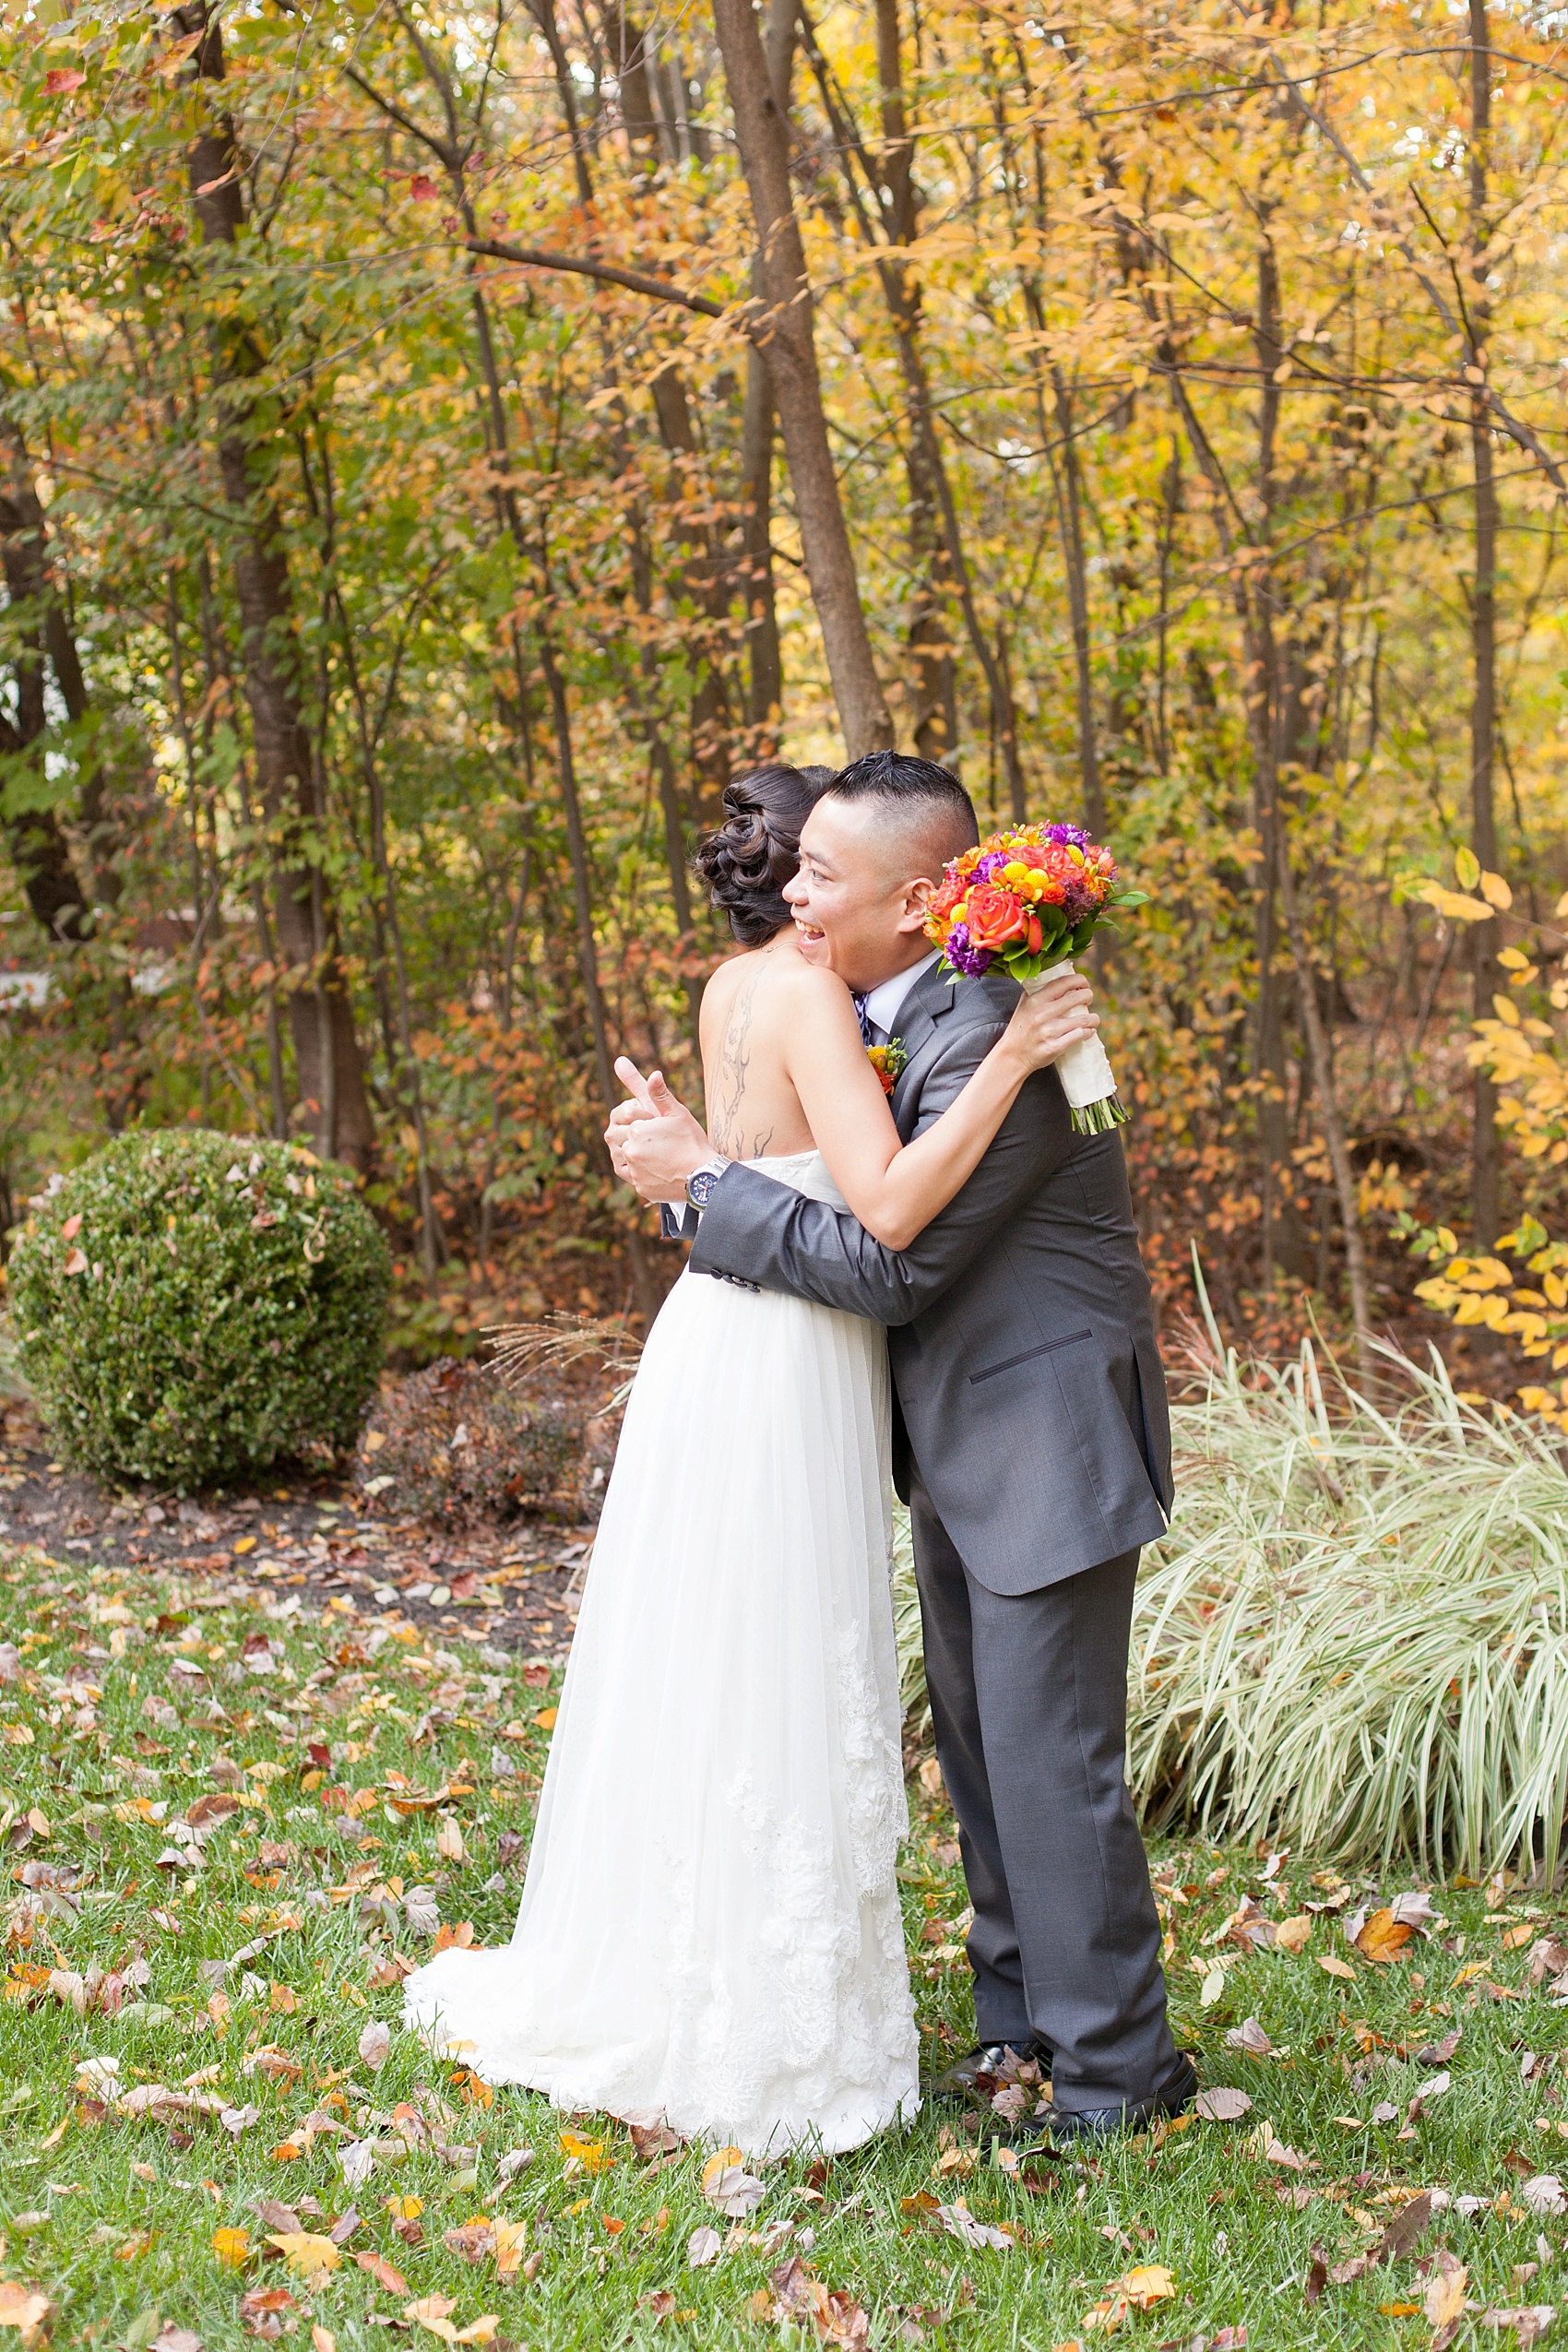 Surprise first look amongst fall foliage. Stonehouse at Stirling Ridge fall wedding photos, by Mikkel Paige Photography, New Jersey wedding photographer.